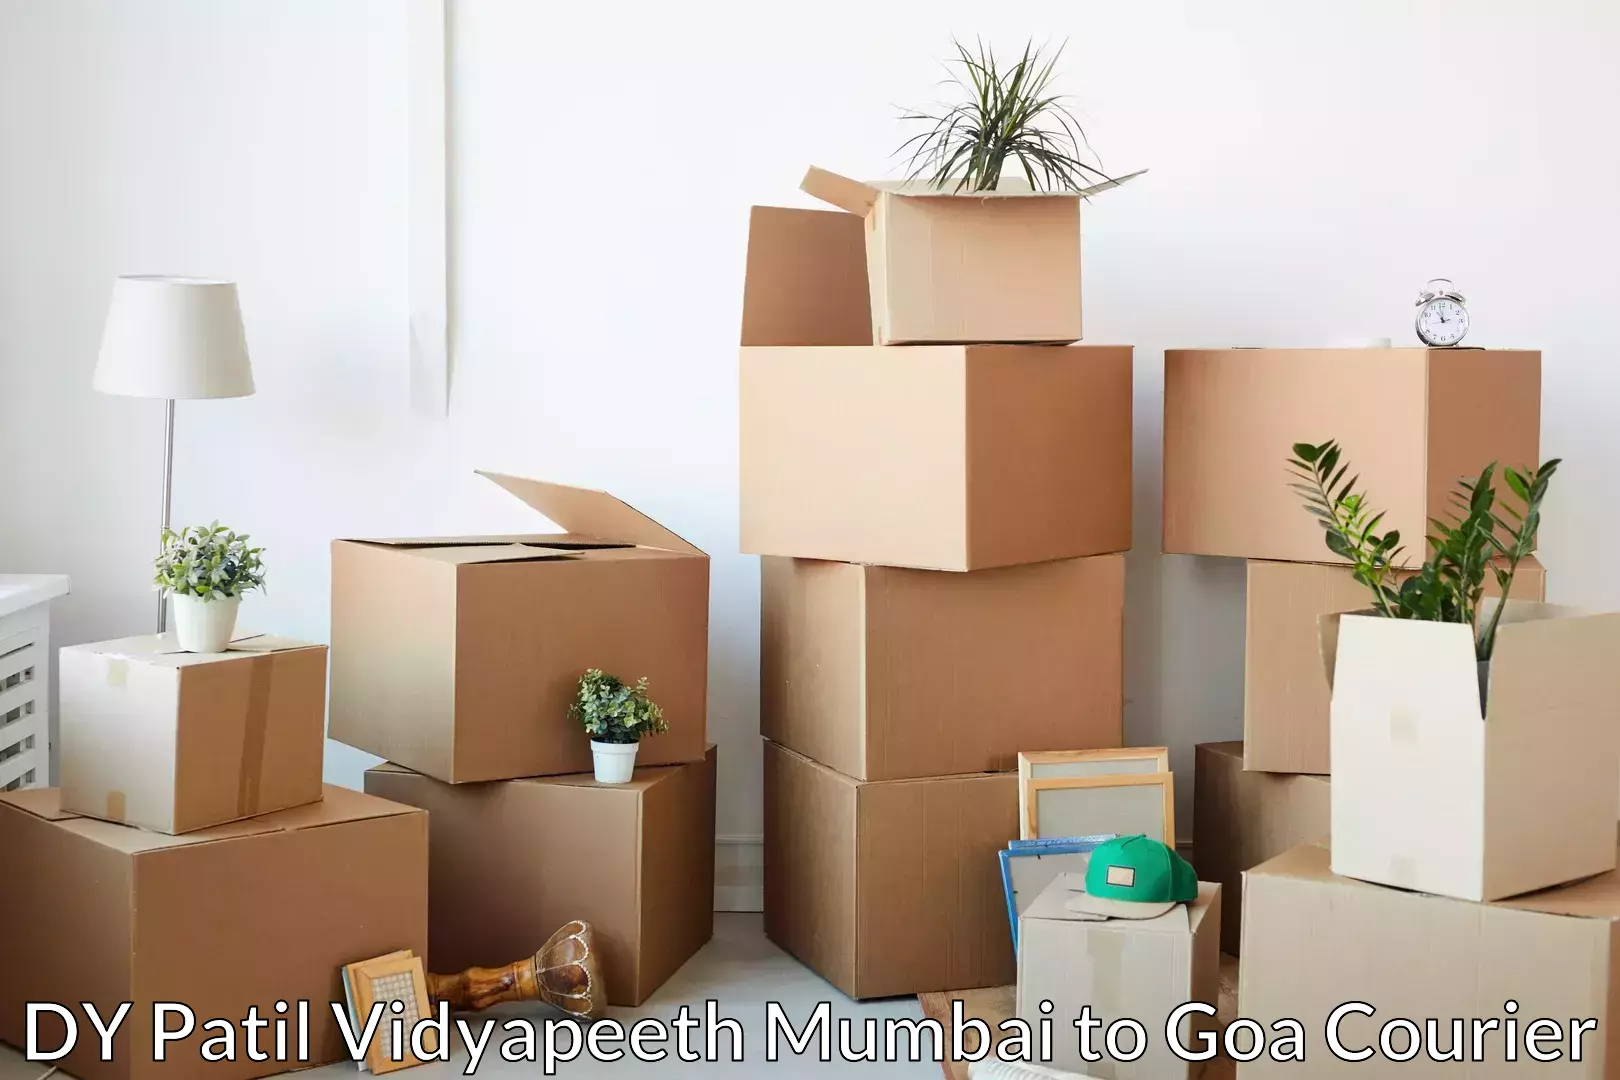 Full home relocation services in DY Patil Vidyapeeth Mumbai to Bicholim